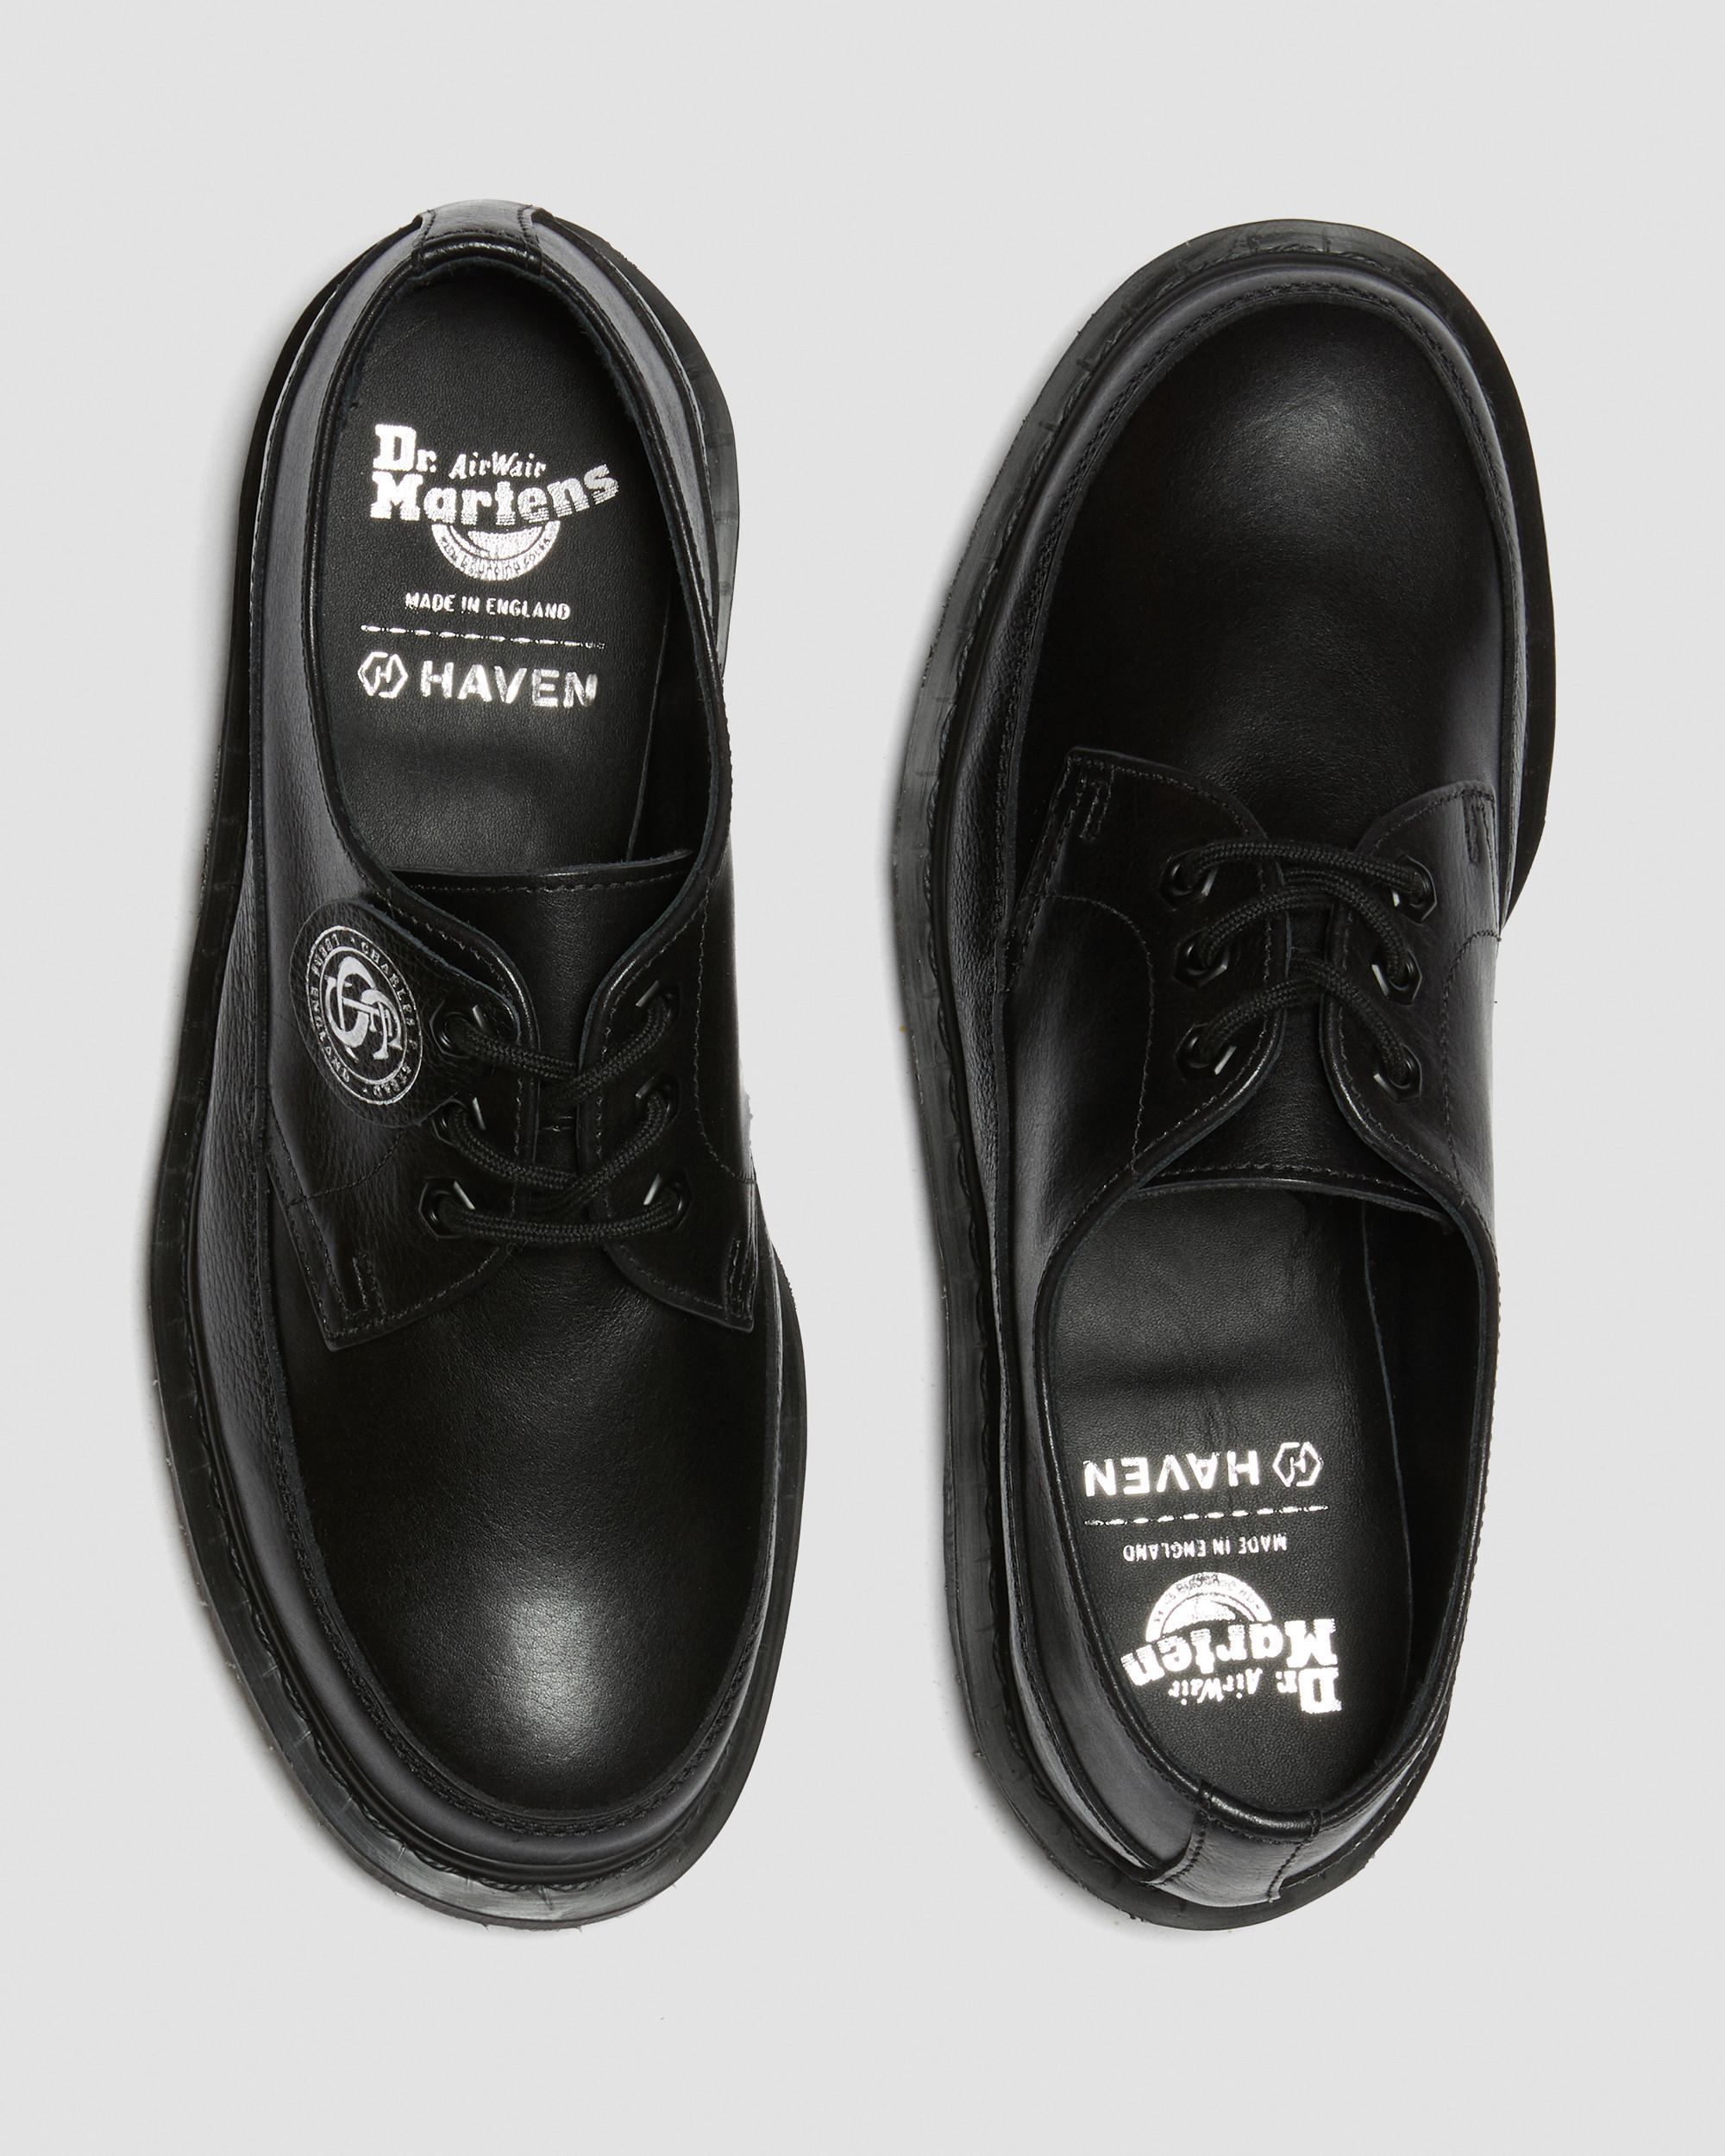 DR MARTENS 1461 Haven Made in England Leather Shoes